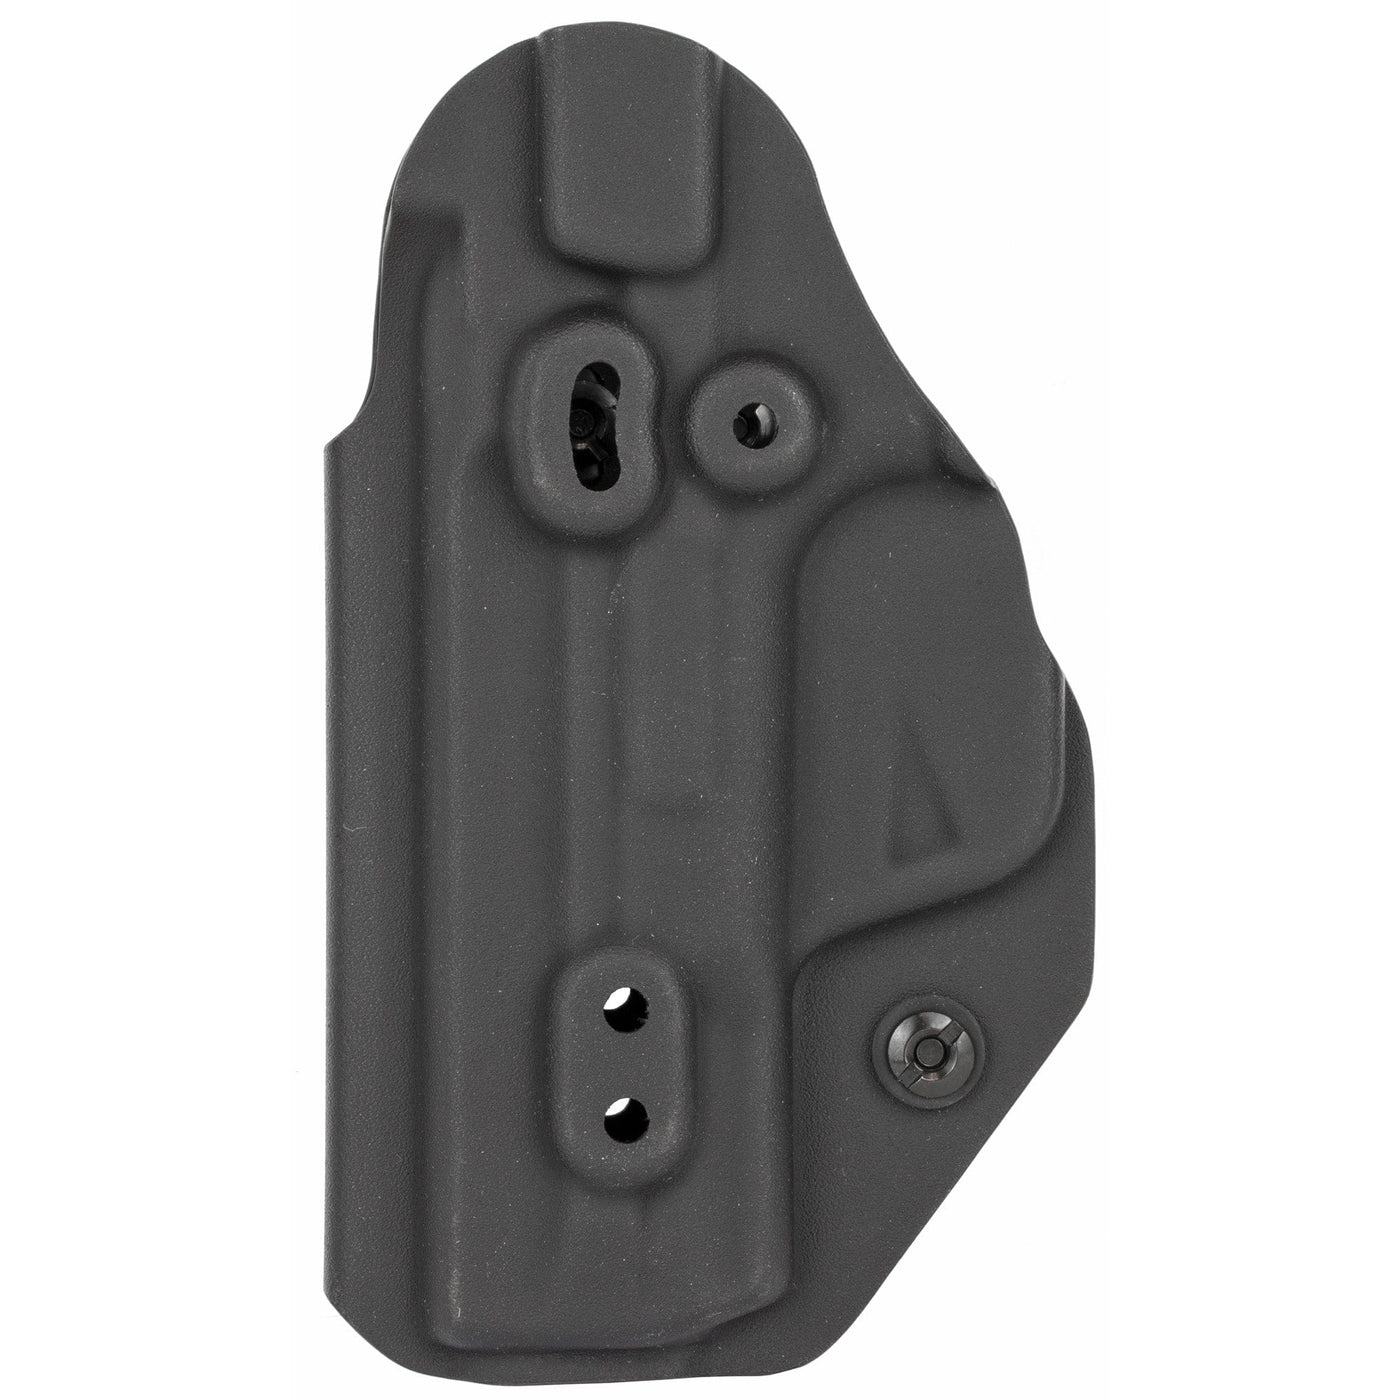 L.A.G. Tactical, Inc. Lag Lib Mk Ii M&p M2.0 3.6" Blk Ambi Holsters